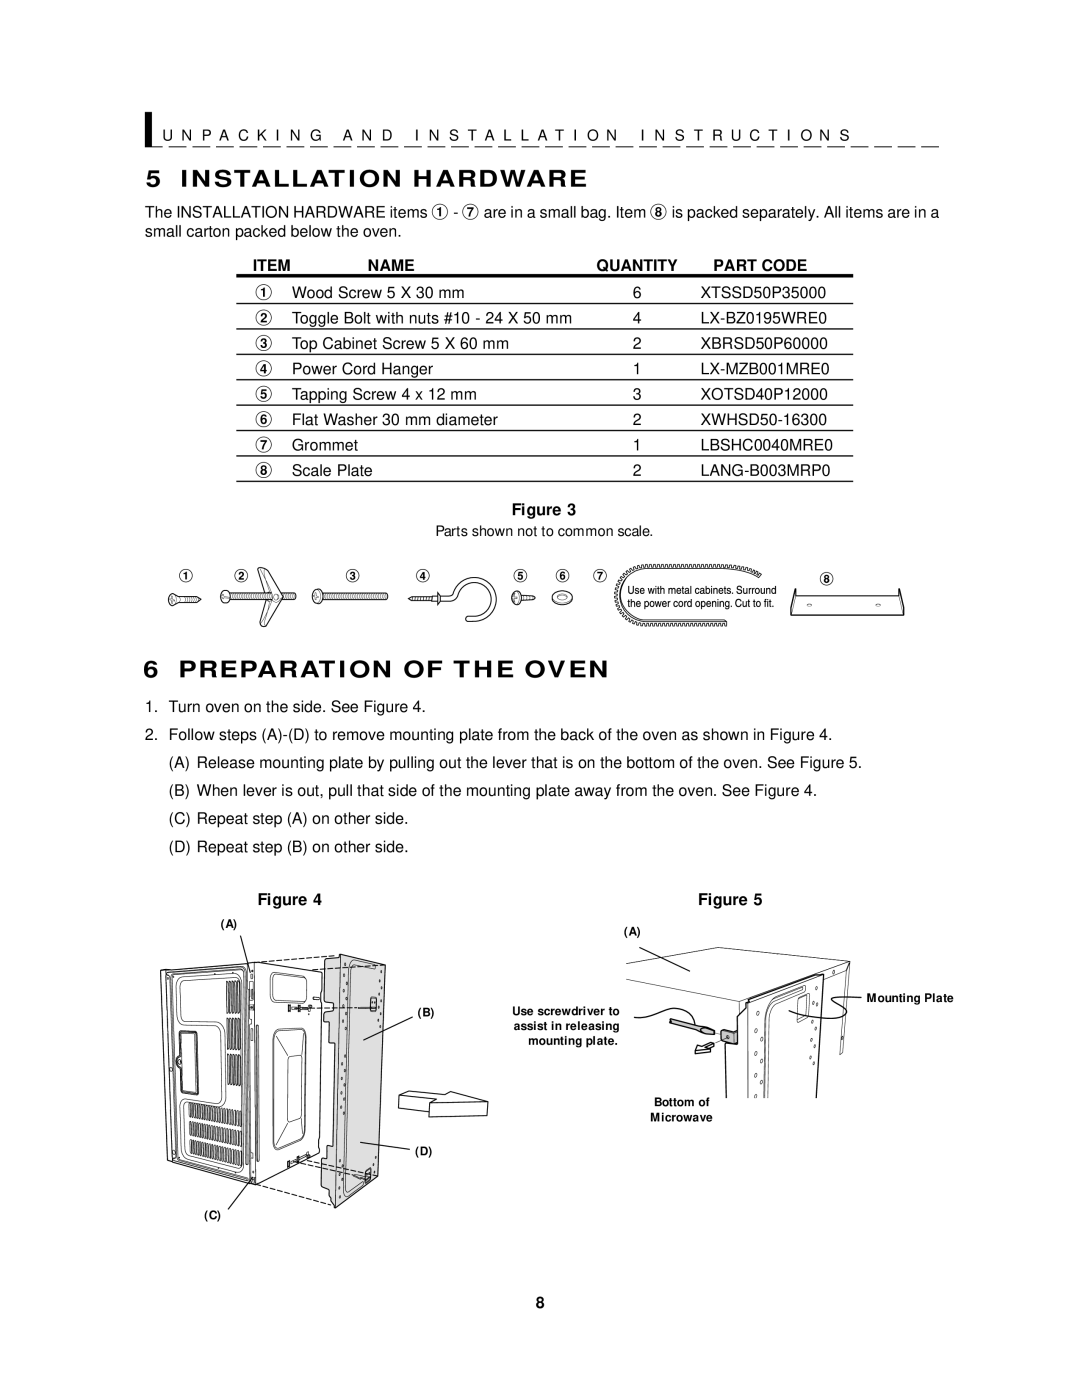 Sharp R-1200, R-1201 operation manual Installation Hardware, Preparation of the Oven 